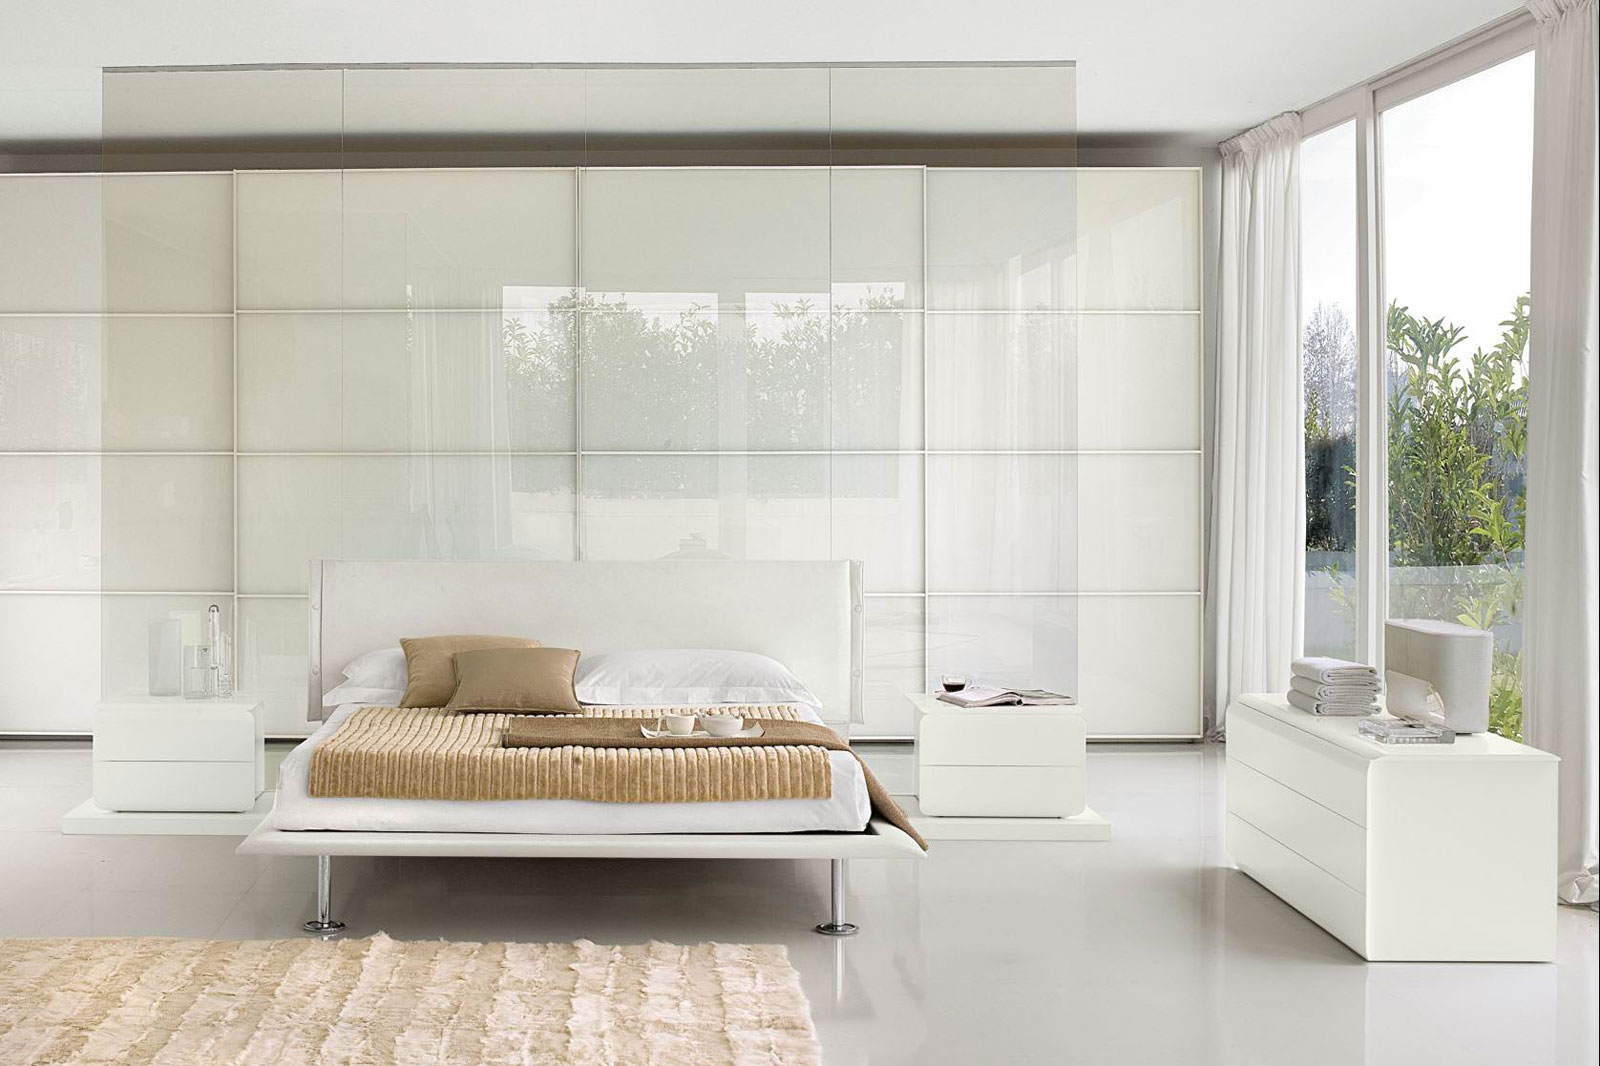 Contemporary Bedroom Bed Fabulous Contemporary Bedroom With Queen Bed Furnished With Double Nightstands Of White Bedroom Furniture And Completed With Cupboard Plus Density Rug Bedroom 15 Simple White Bedroom Furniture For Your Romantic Modern House